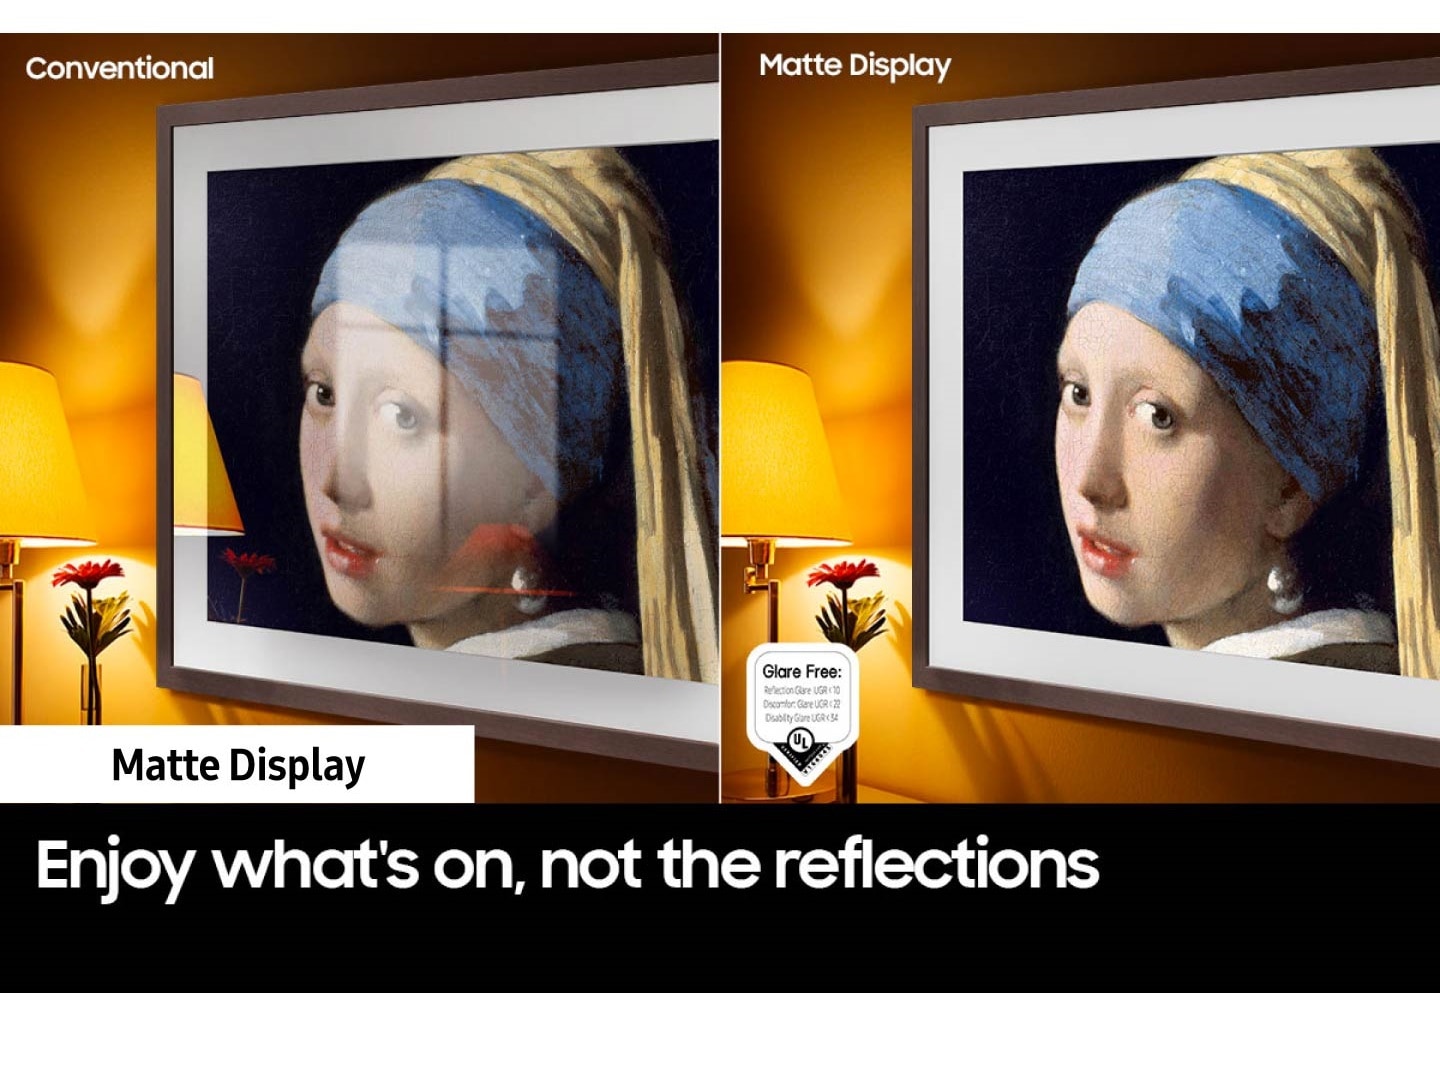 The left side of the screen with the word †Conventional' shows The Frame displaying an artwork full of reflections. The right side of the screen with the words †Matte Display' shows The Frame with the same painting that has no glare. A glare-free certified logo is on the lower left side.